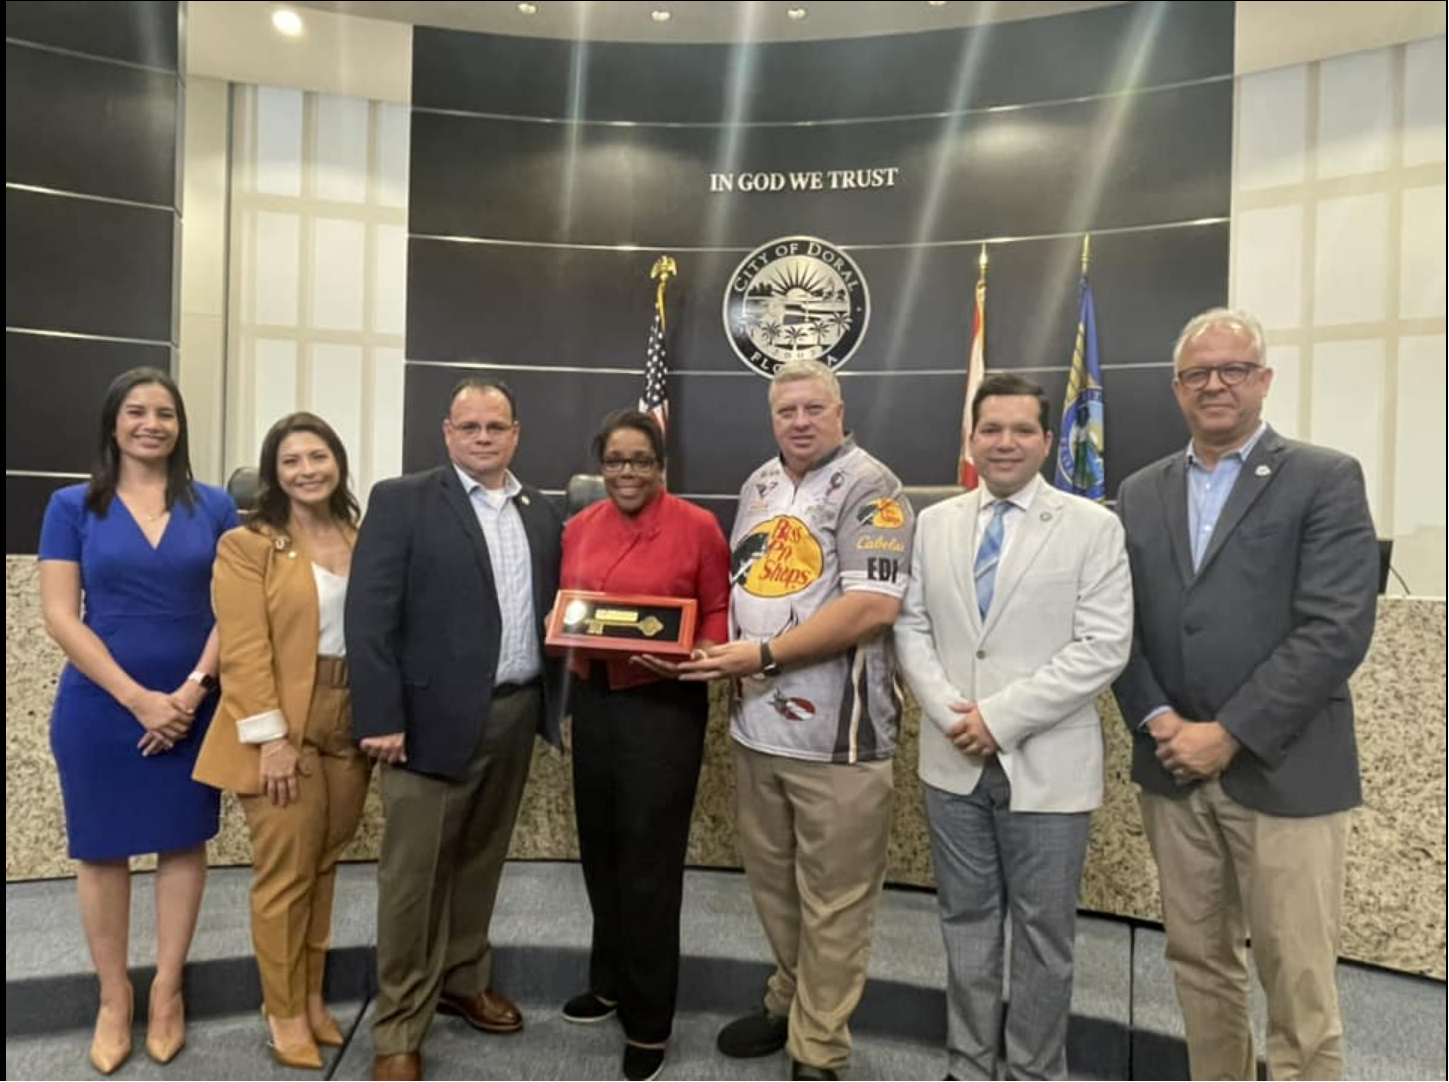 Vet Info receives the Key to the City of Doral Florida